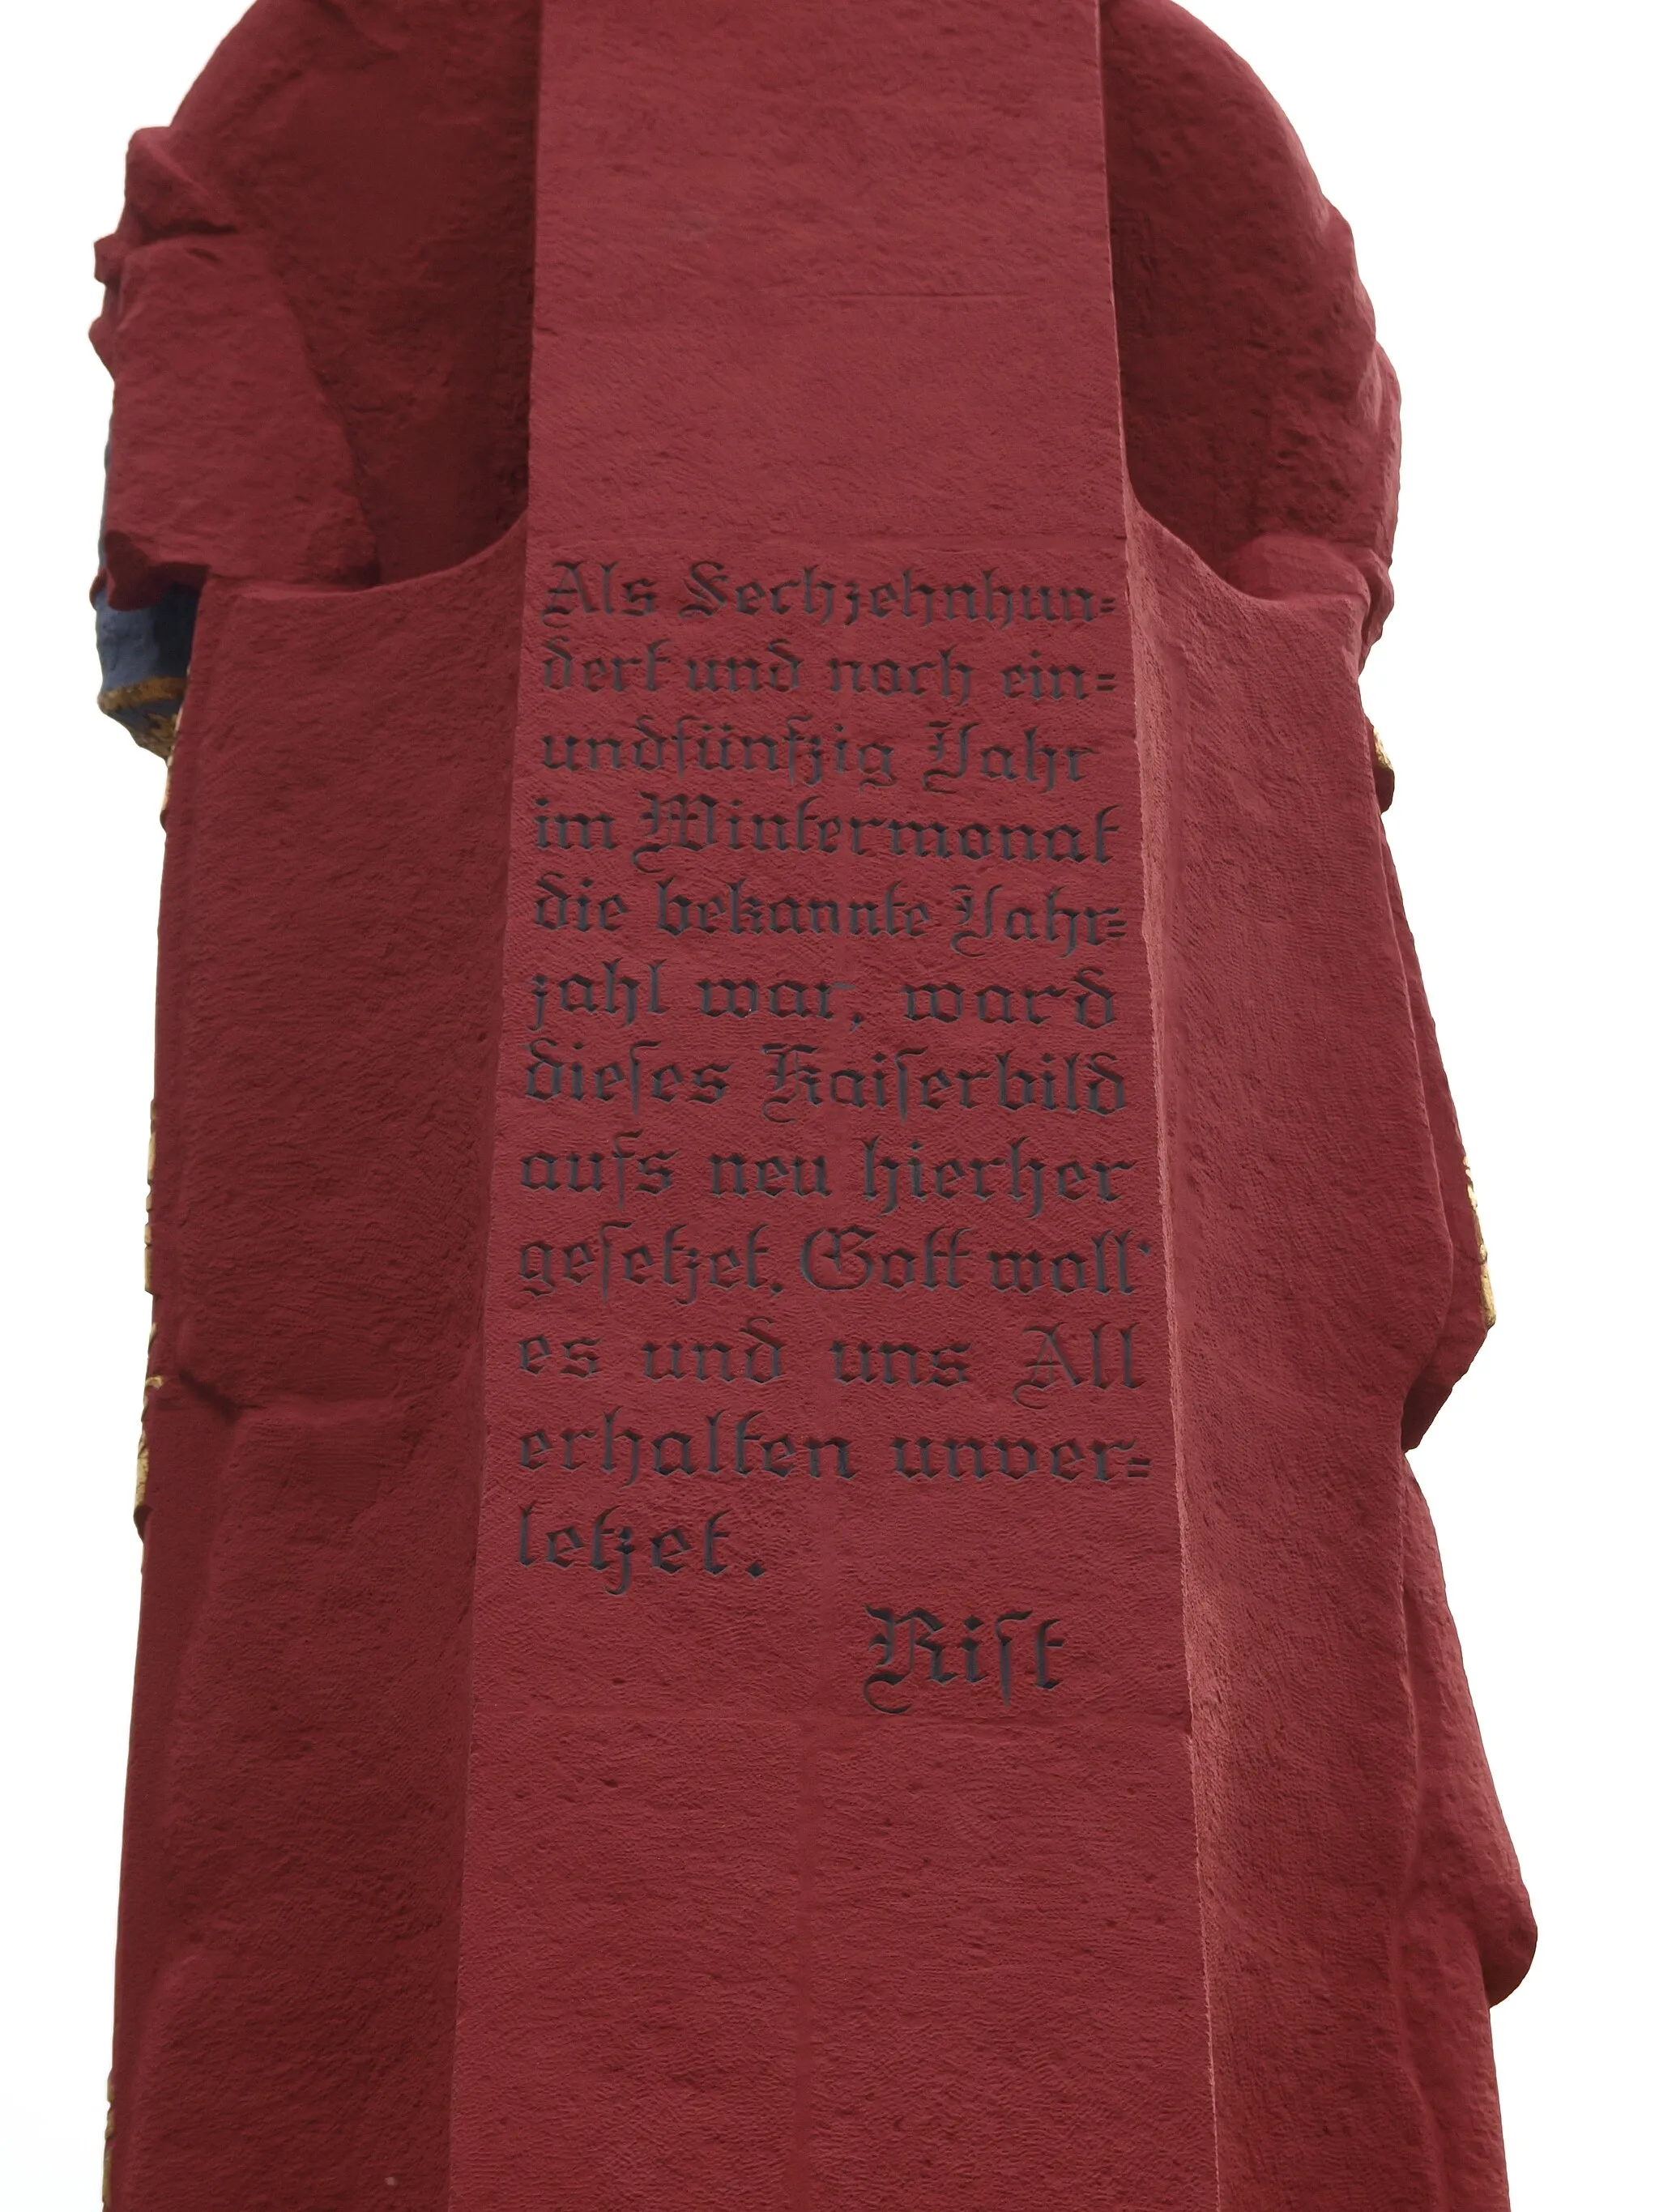 Photo showing: Back side of statue of Roland of Wedel (Holstein), Kreis Pinneberg, Germany after finished restorration on 19 June 2012, in  the earliest known colour design from 1907/1986. Cultural heritage monument. The inscription is saying: In 1651 in winter month [November] of the known year, this eperors statue has been re errected here again, may God will preserve it for us all. Rist.